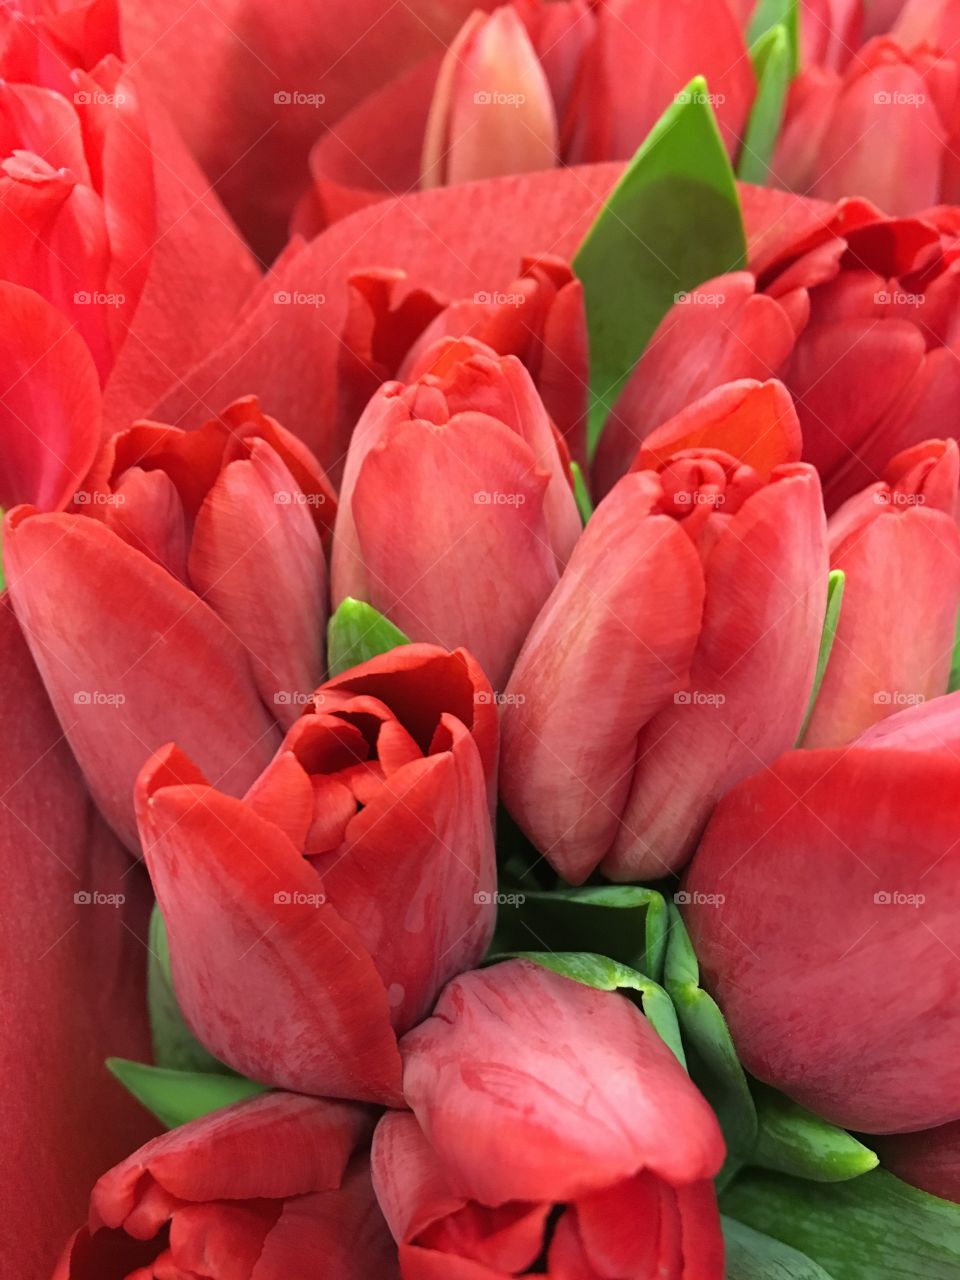 Red tulips